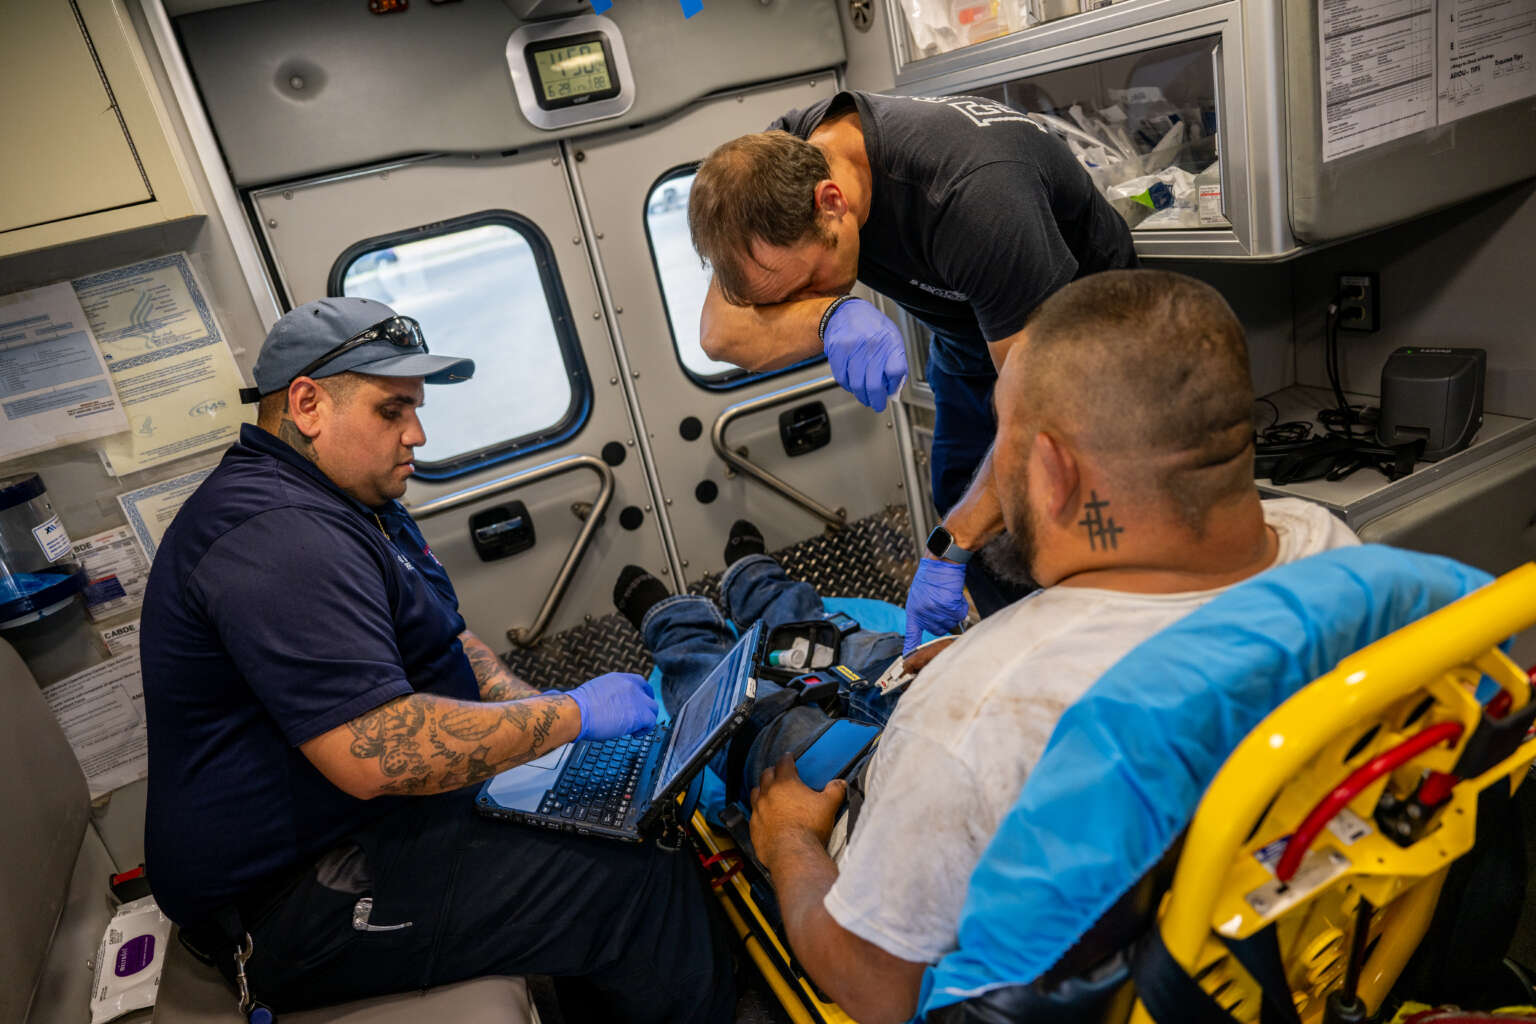 Emergency Medical Technicians William Dorsey and Omar Amezcua assist a person after he called in for chest pain during a heatwave on June 29, 2023 in Eagle Pass, Texas.